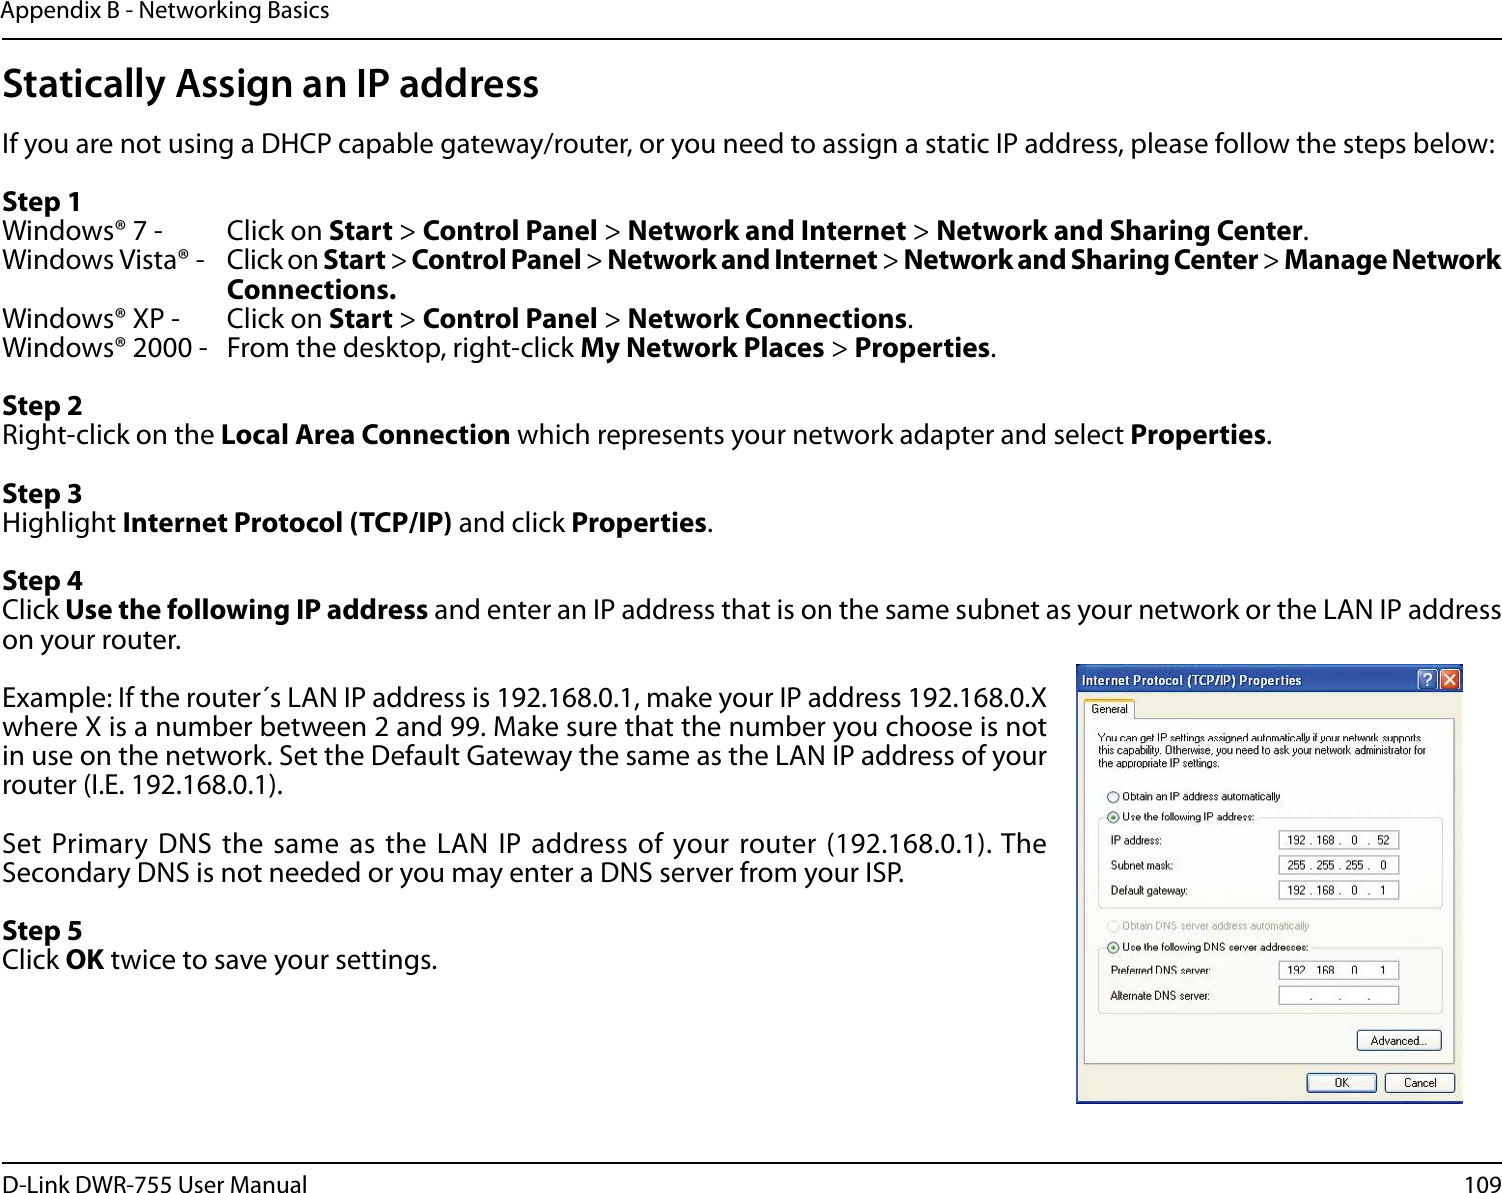 109D-Link DWR-755 User ManualAppendix B - Networking BasicsStatically Assign an IP addressIf you are not using a DHCP capable gateway/router, or you need to assign a static IP address, please follow the steps below:Step 1Windows® 7 -  Click on Start &gt; Control Panel &gt; Network and Internet &gt; Network and Sharing Center.Windows Vista® -  Click on Start &gt; Control Panel &gt; Network and Internet &gt; Network and Sharing Center &gt; Manage Network    Connections.Windows® XP -  Click on Start &gt; Control Panel &gt; Network Connections.Windows® 2000 -  From the desktop, right-click My Network Places &gt; Properties.Step 2Right-click on the Local Area Connection which represents your network adapter and select Properties.Step 3Highlight Internet Protocol (TCP/IP) and click Properties.Step 4Click Use the following IP address and enter an IP address that is on the same subnet as your network or the LAN IP address on your router. Example: If the router´s LAN IP address is 192.168.0.1, make your IP address 192.168.0.X where X is a number between 2 and 99. Make sure that the number you choose is not in use on the network. Set the Default Gateway the same as the LAN IP address of your router (I.E. 192.168.0.1). Set Primary DNS the same as the LAN IP address of your router (192.168.0.1). The Secondary DNS is not needed or you may enter a DNS server from your ISP.Step 5Click OK twice to save your settings.